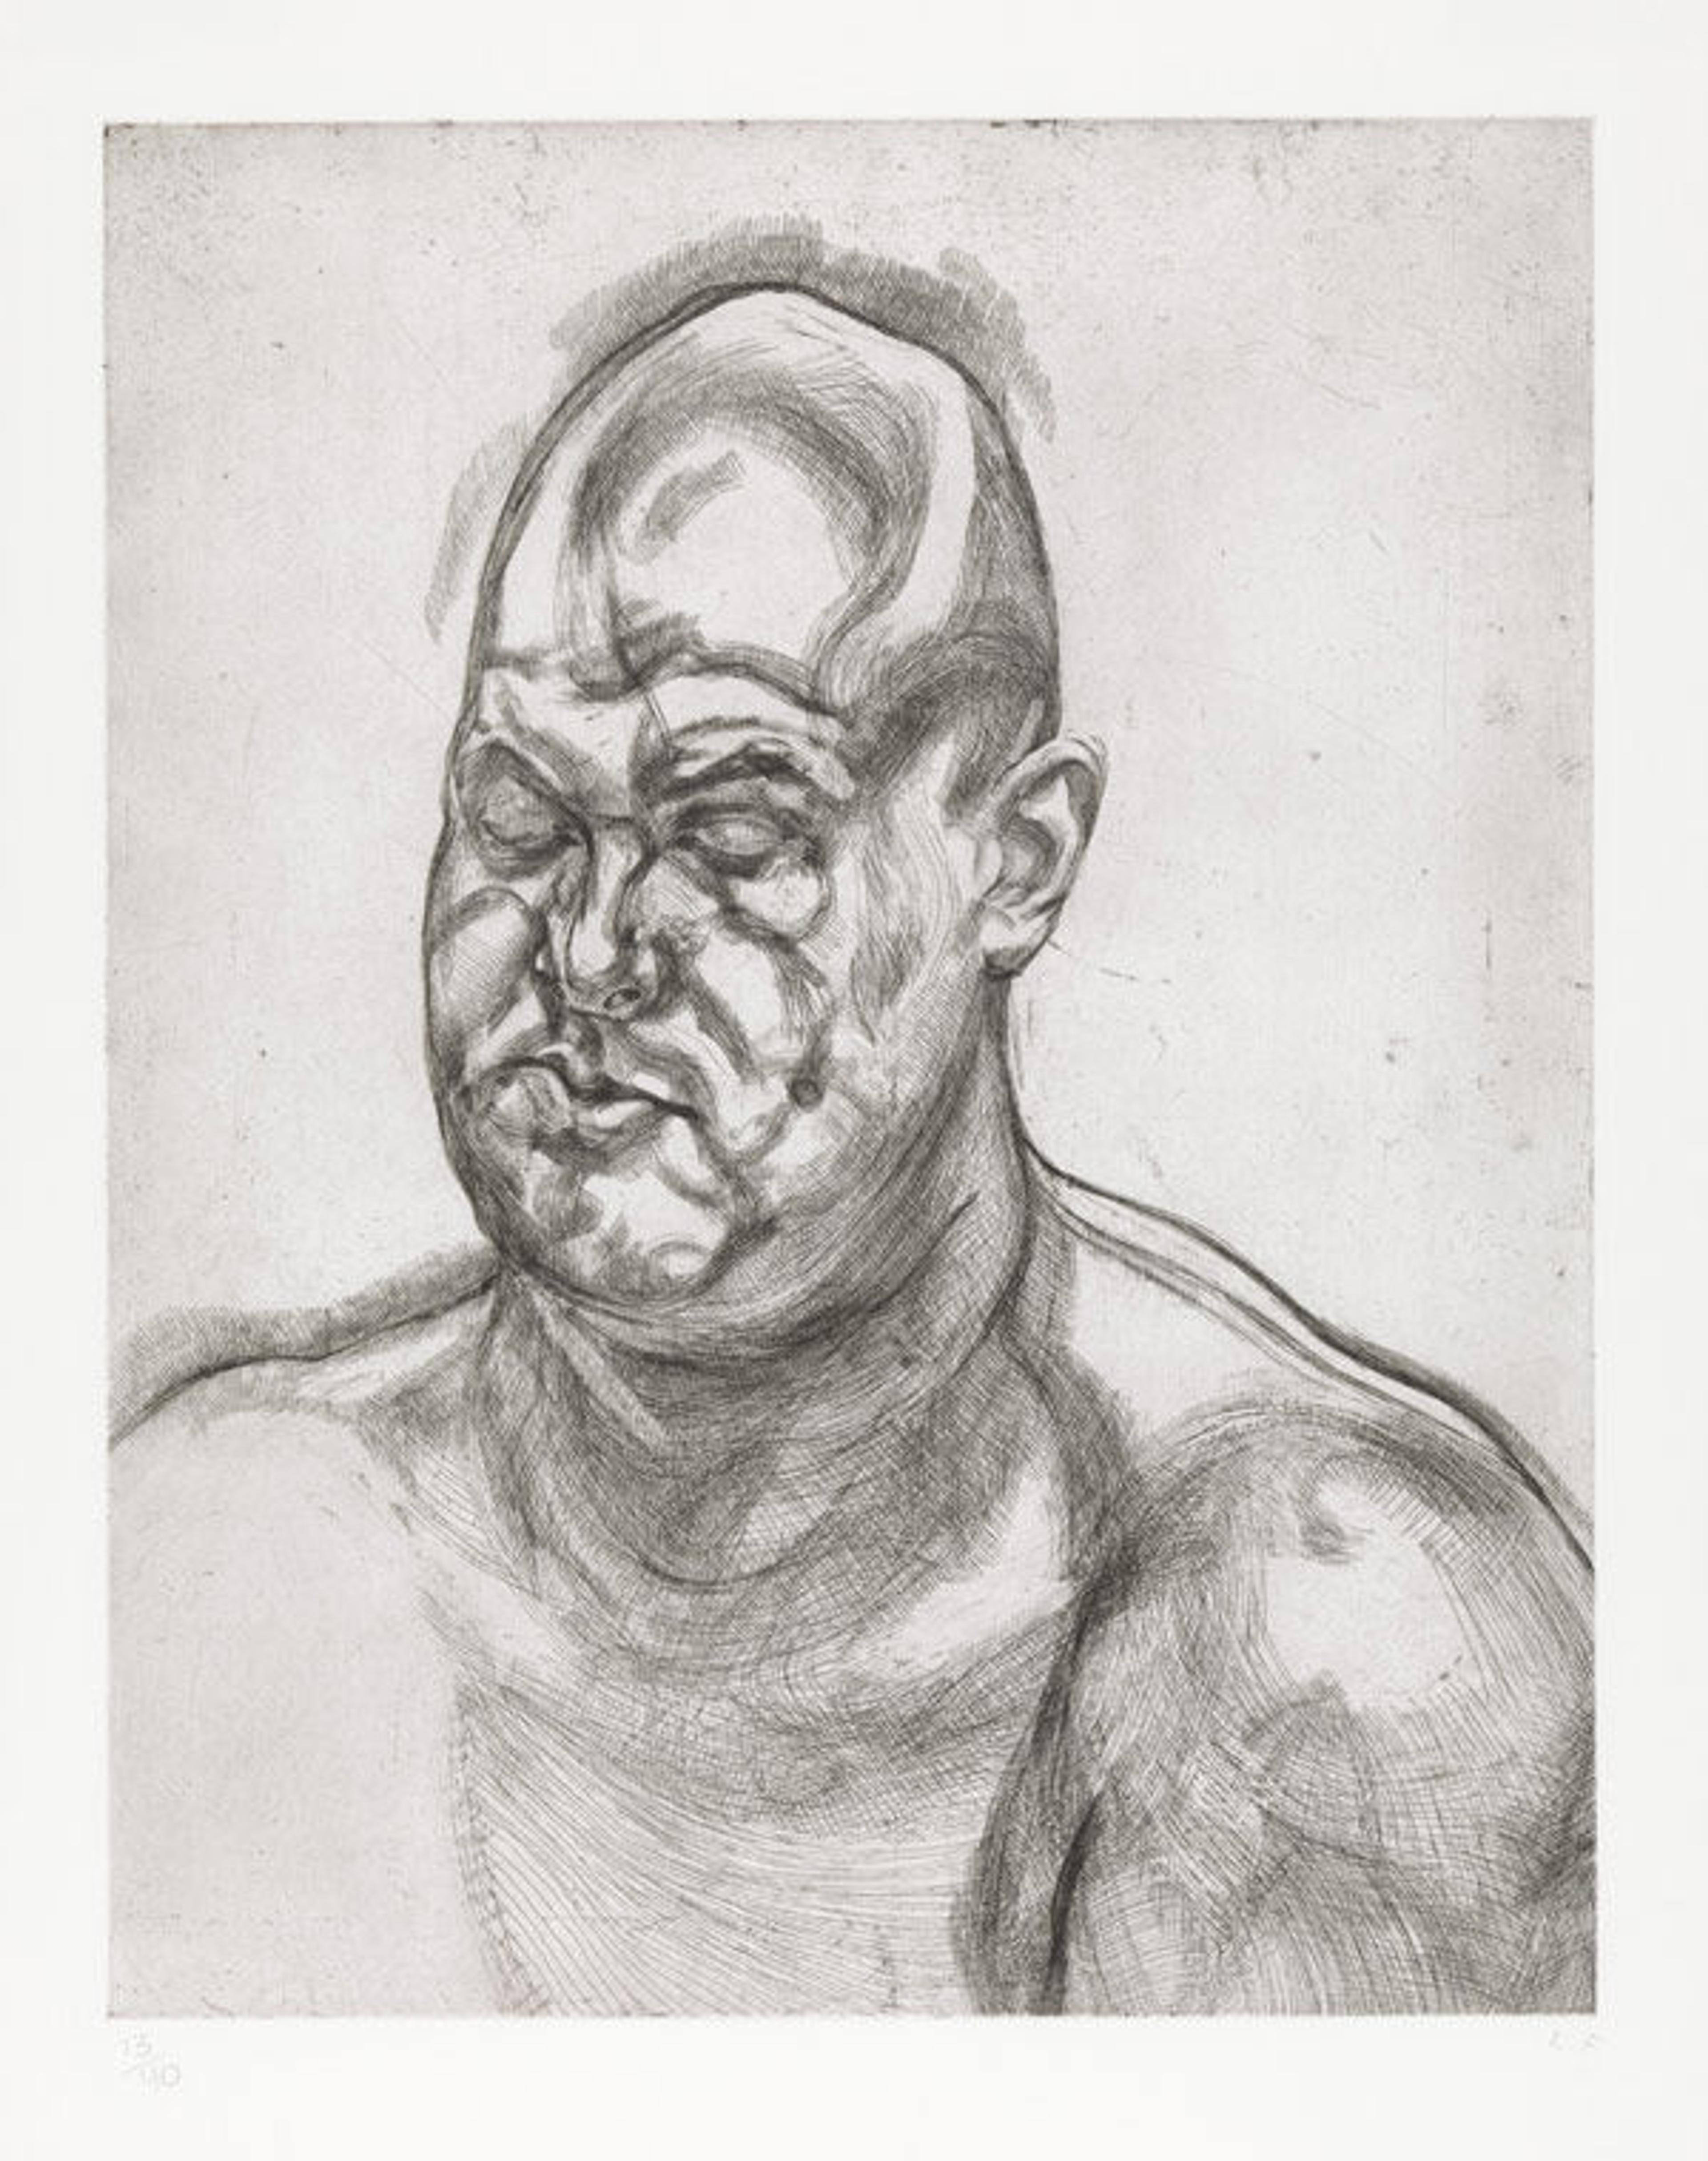 Lucian Freud, (British [born Germany], 1922–2011). Large Head, 1993. Etching; plate: 27 5/16 x 21 5/16 in. (69.4 x 54.1 cm), Sheet: 32 ½ x 26 1/8 in. (82.6 x 66.4 cm. The Metropolitan Museum of Art, New York, Bequest of William S. Lieberman (2005, 2007.49.588)